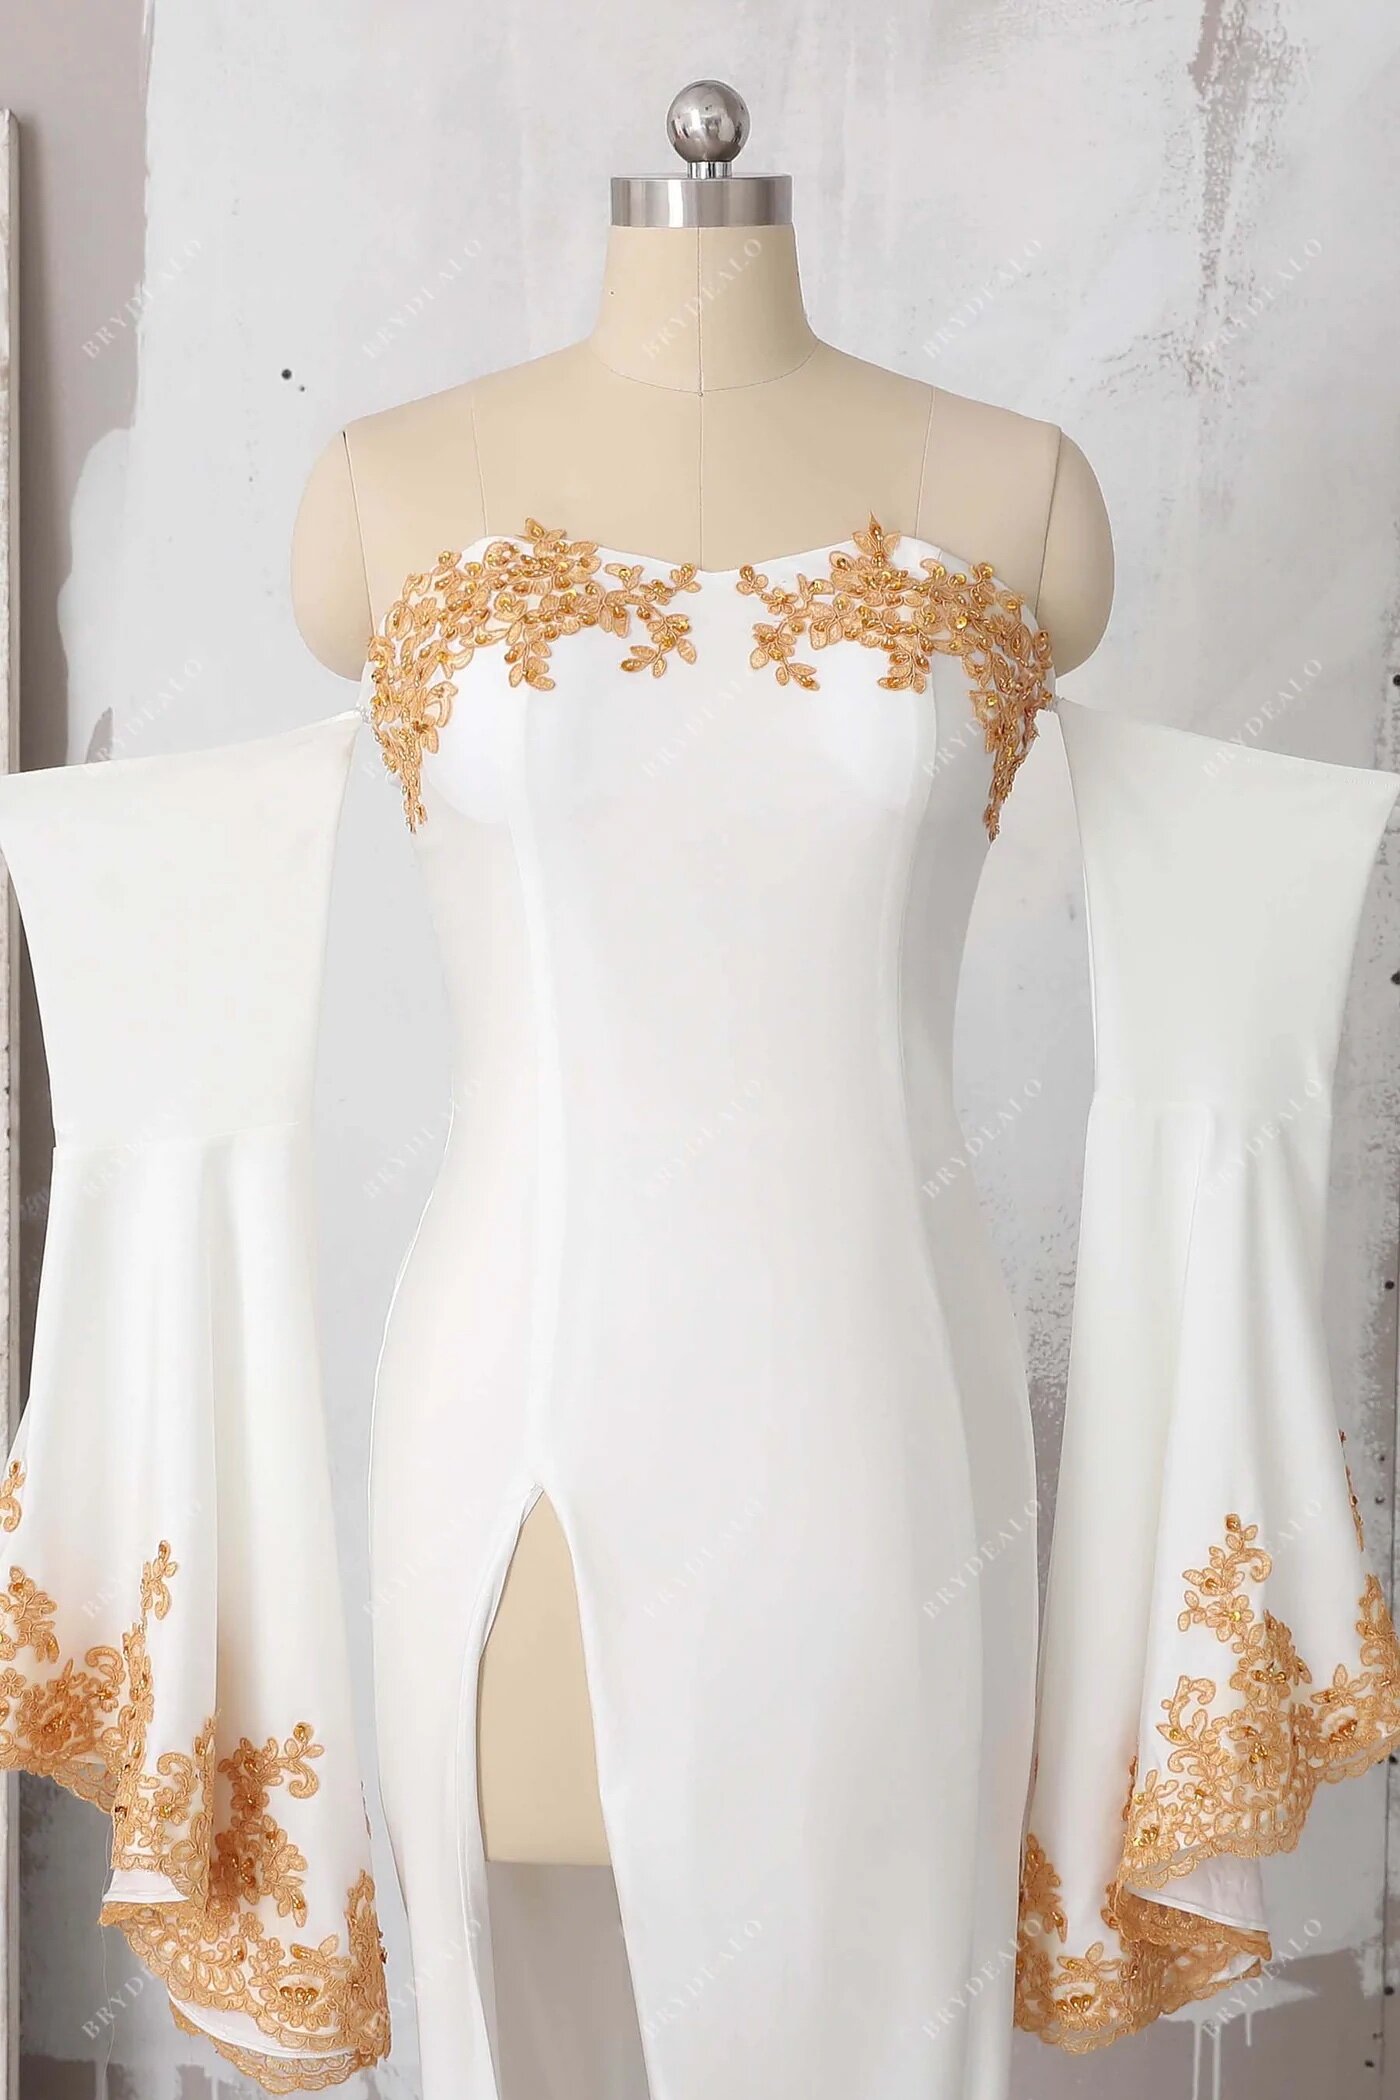 Luxury Designer Dresses and Gowns - District 5 Boutique